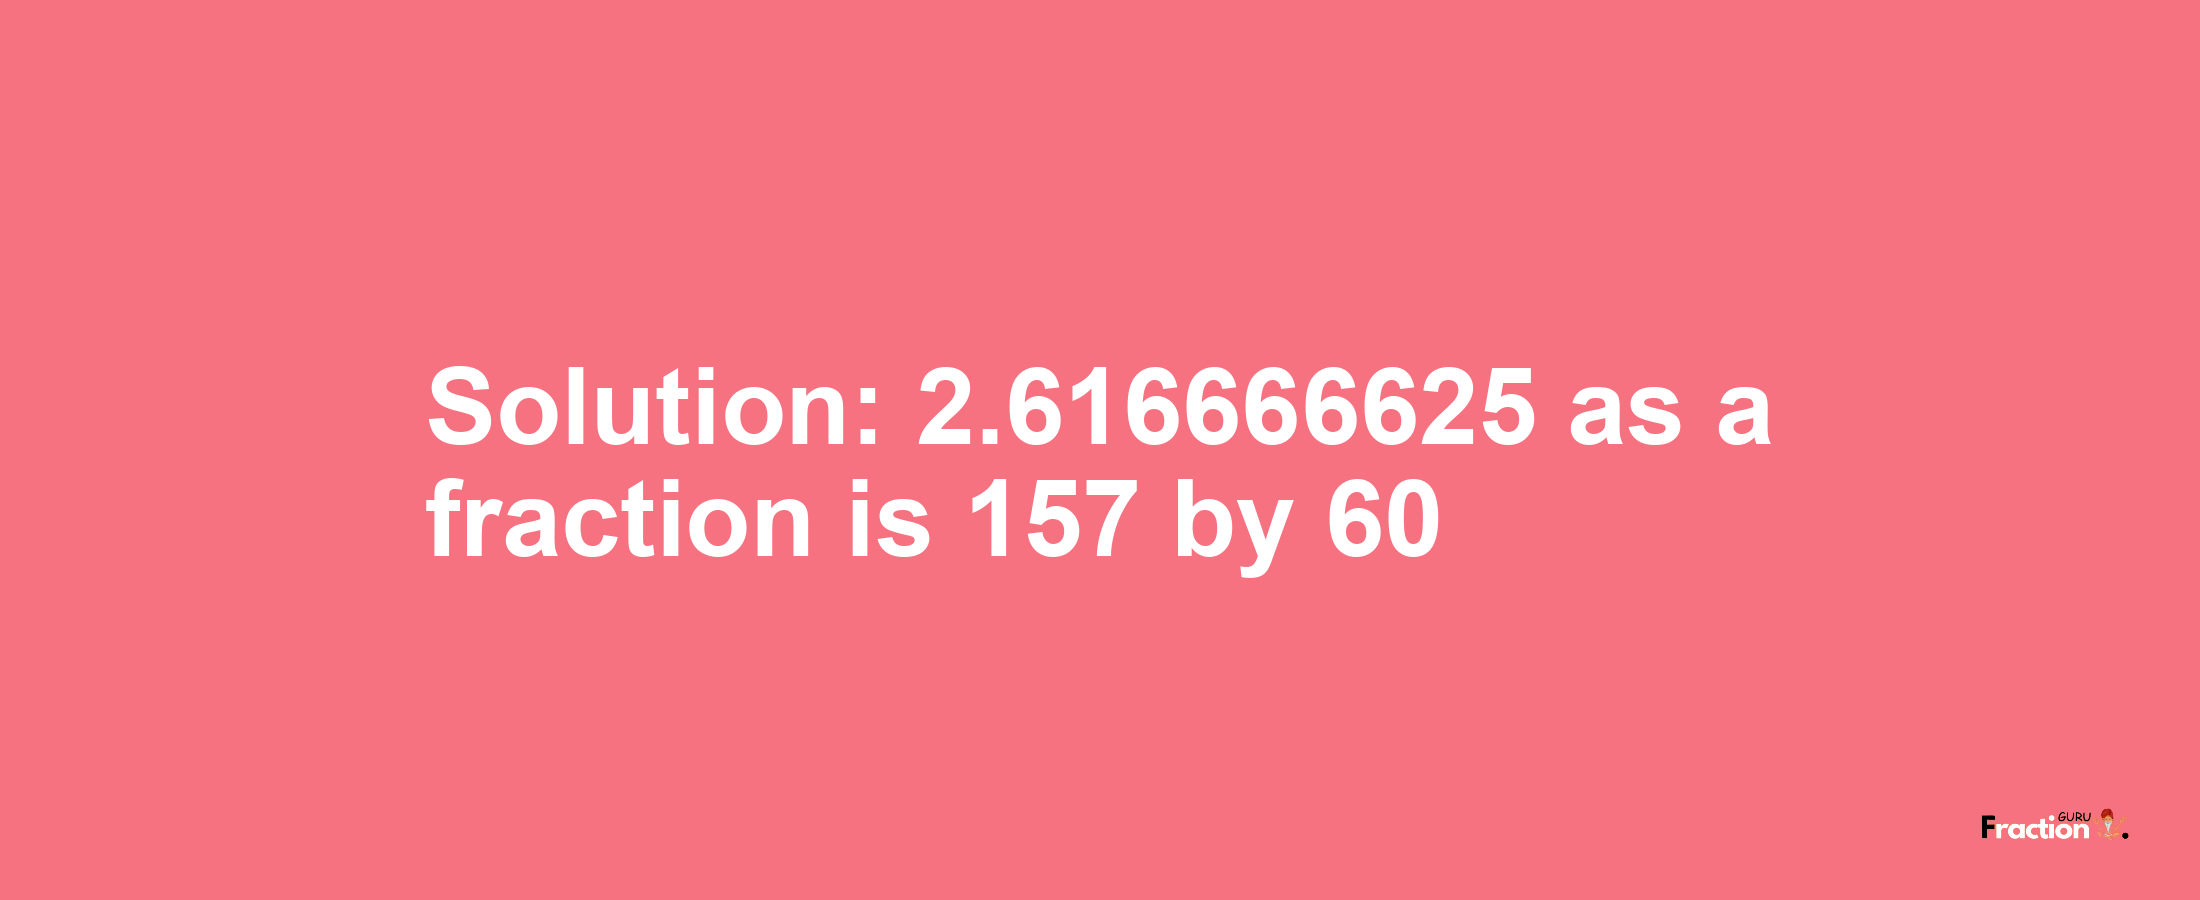 Solution:2.616666625 as a fraction is 157/60